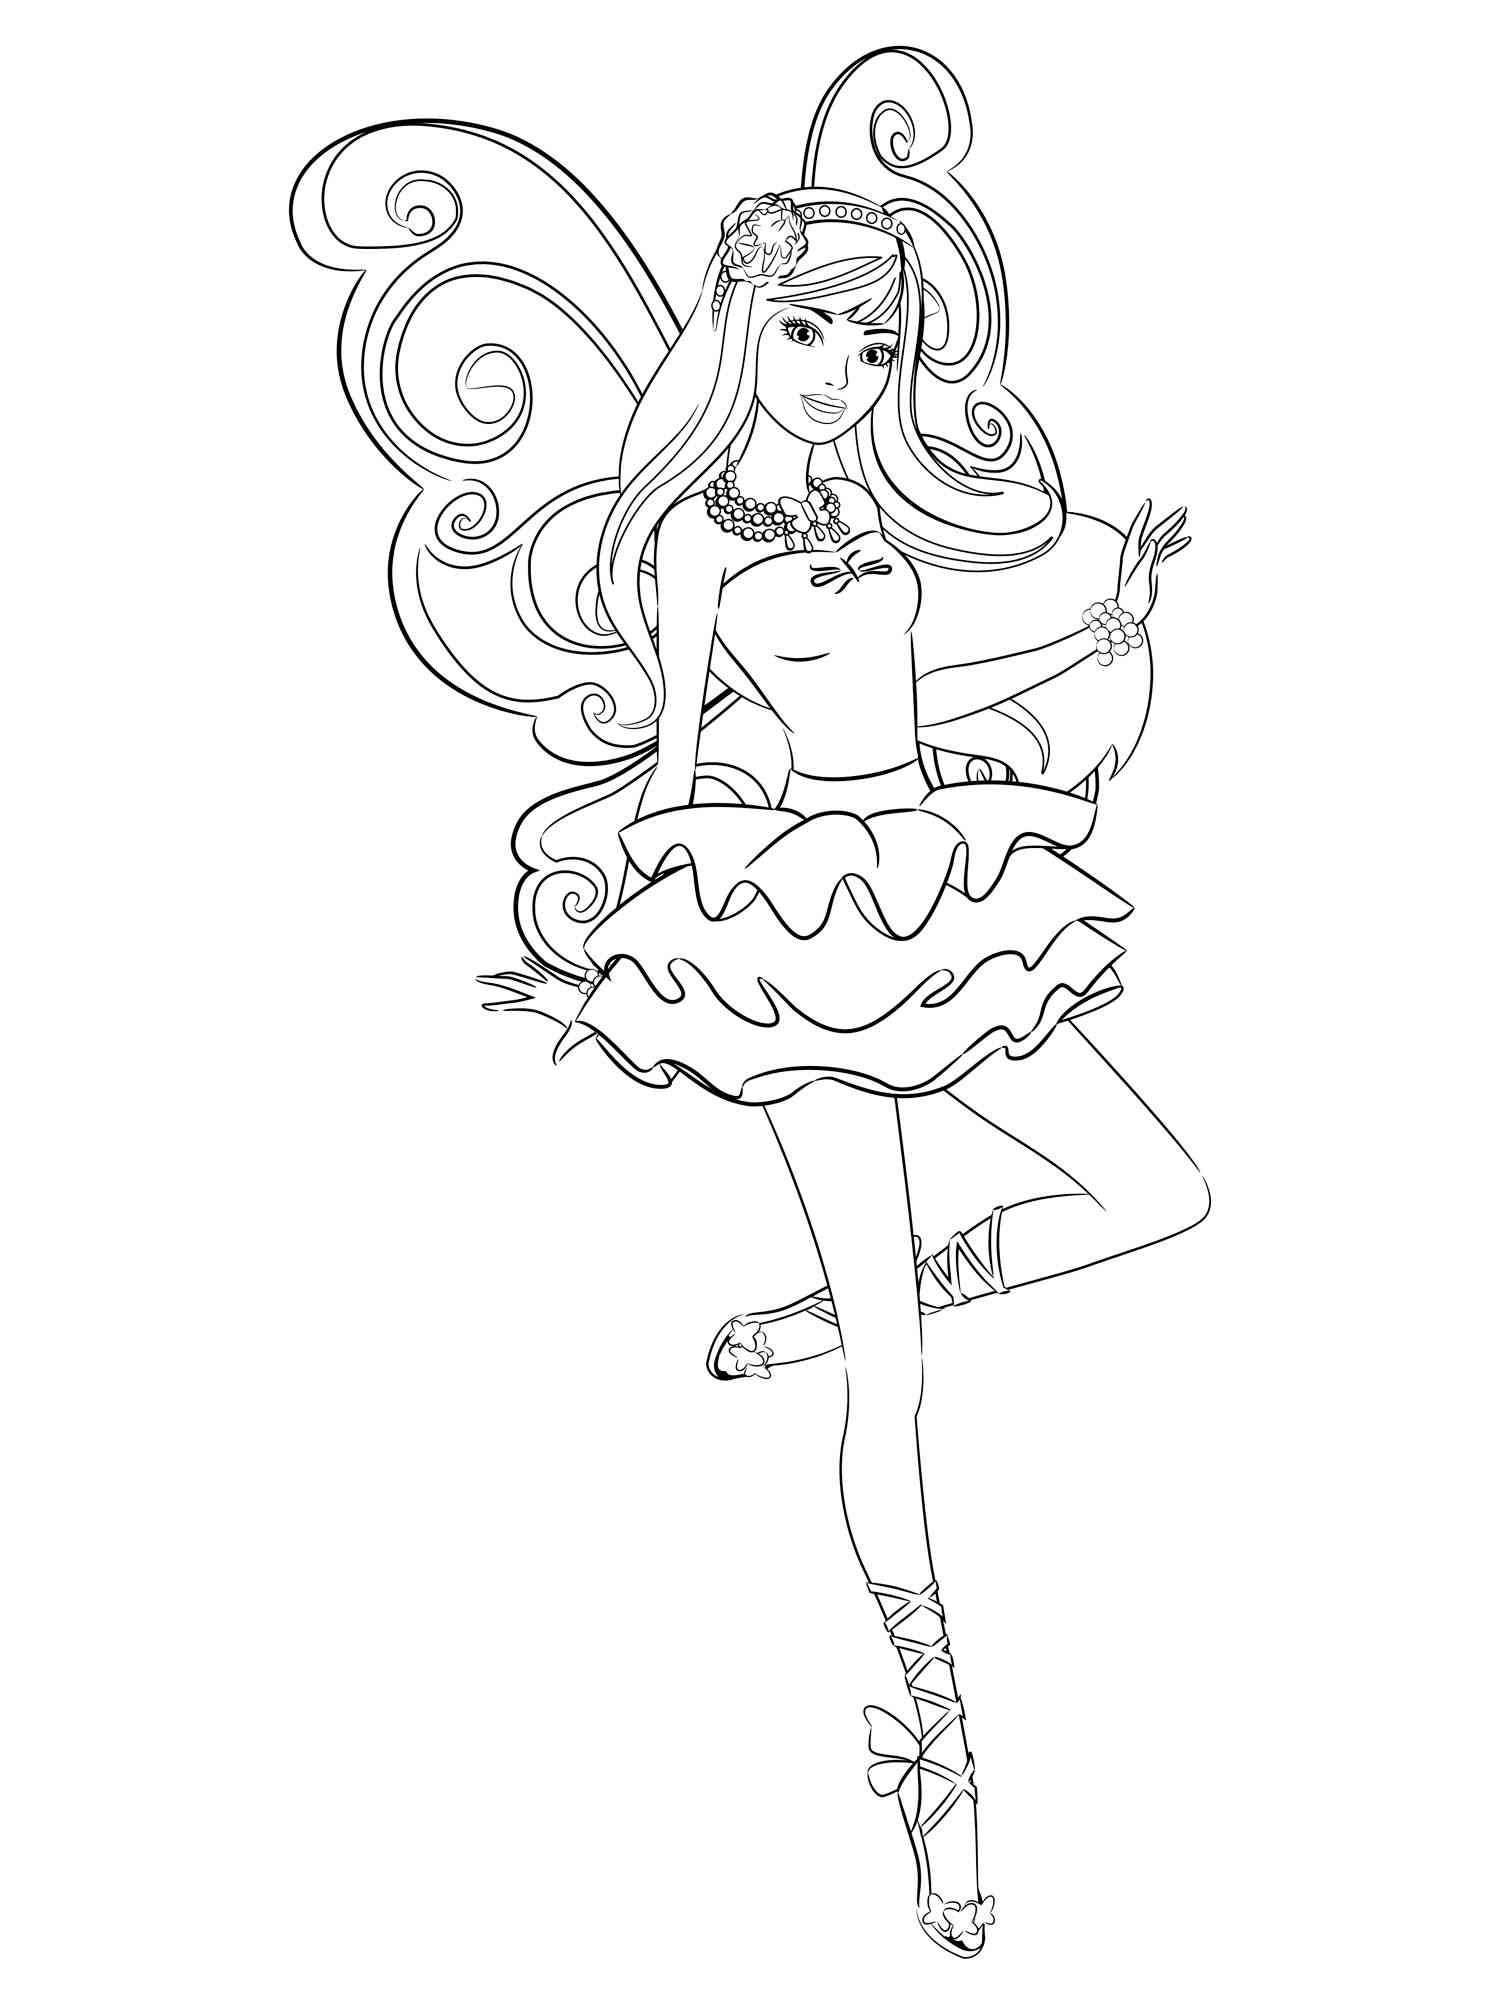 Lovely Barbie Fairy coloring page